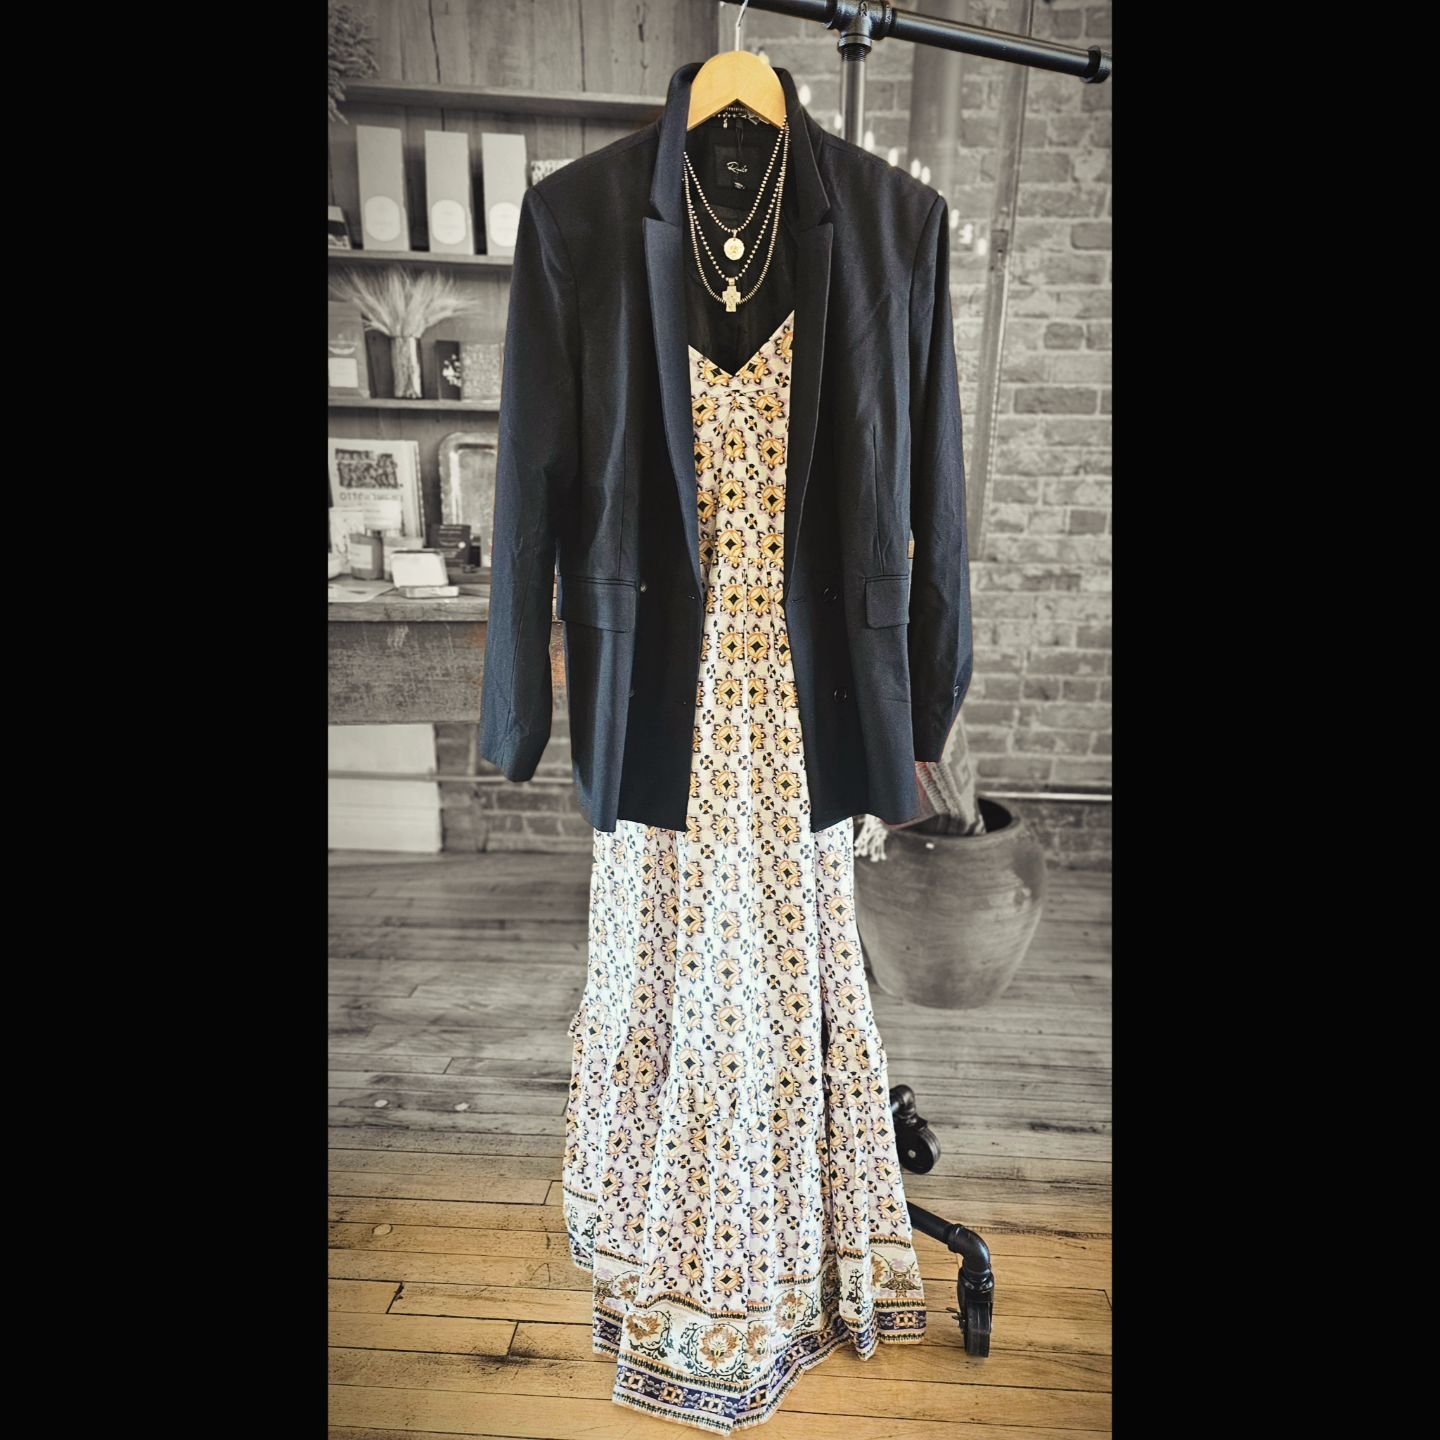 Cleobella....Rails....and Richard Schmidt navajo pearls.....Mother's Day 2024....or Graduation 2024....or just because....

#mothersday #rails #cleobella #thatswyoming #wyominglife #wyoming #shopsmall #shoplocal #downtown